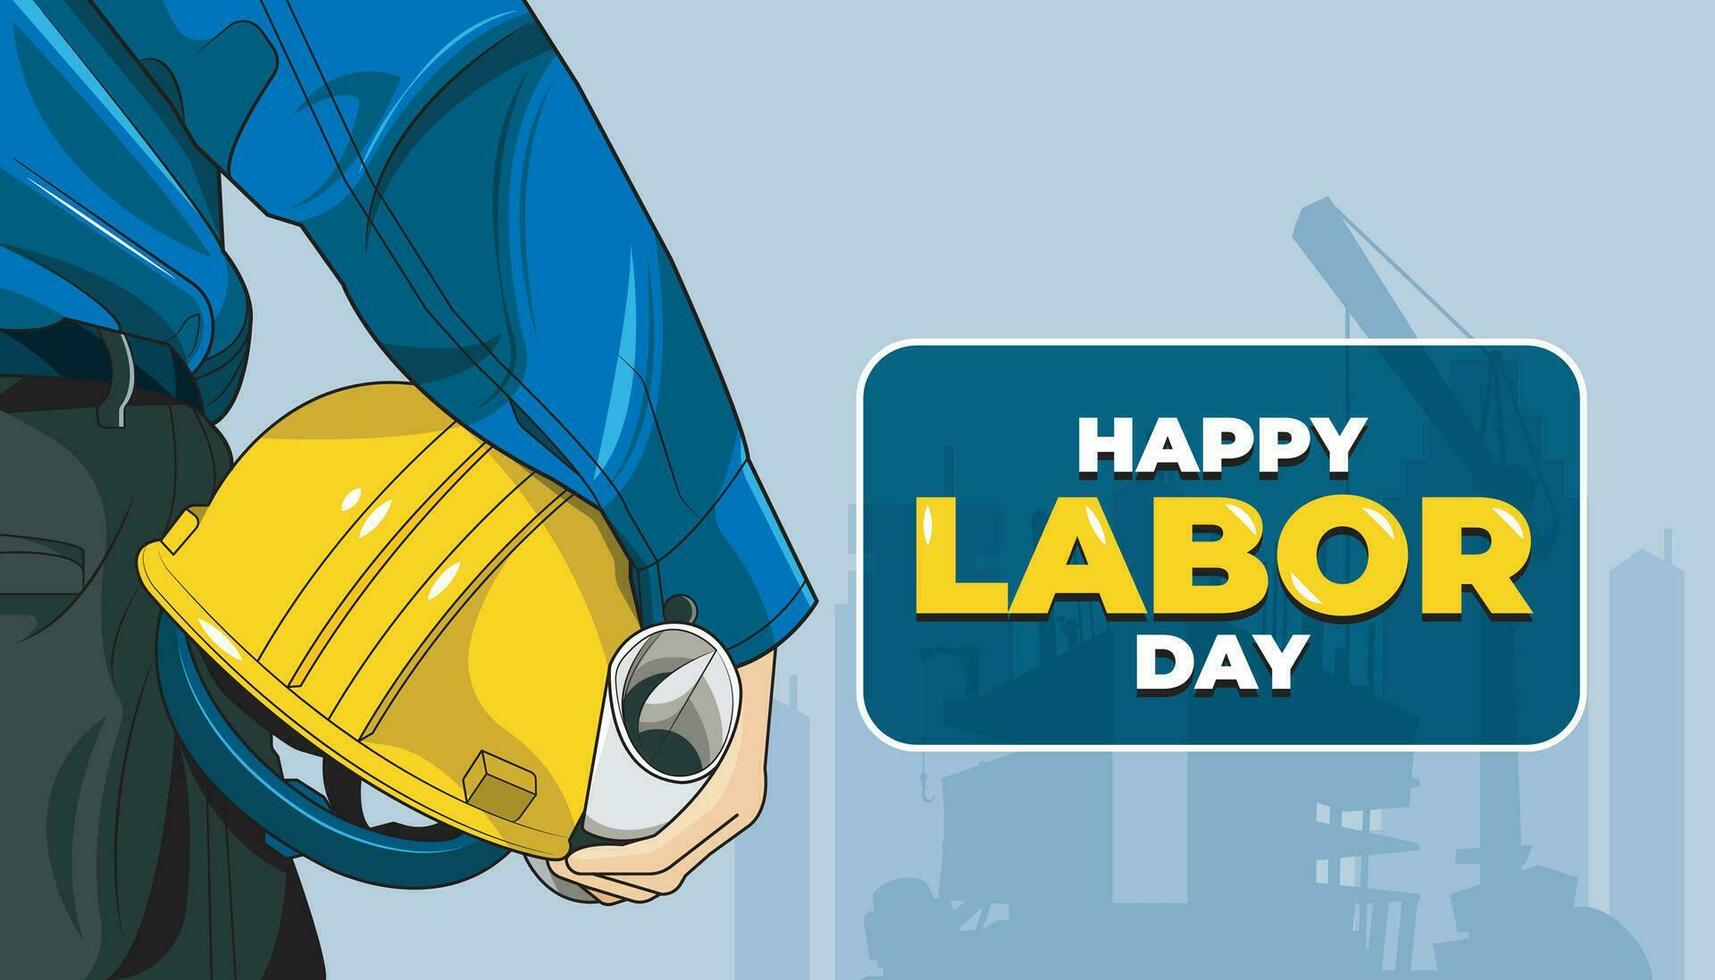 Happy Labor Day banner. Design Template. A construction worker or foreman at a construction site vector illustration free download